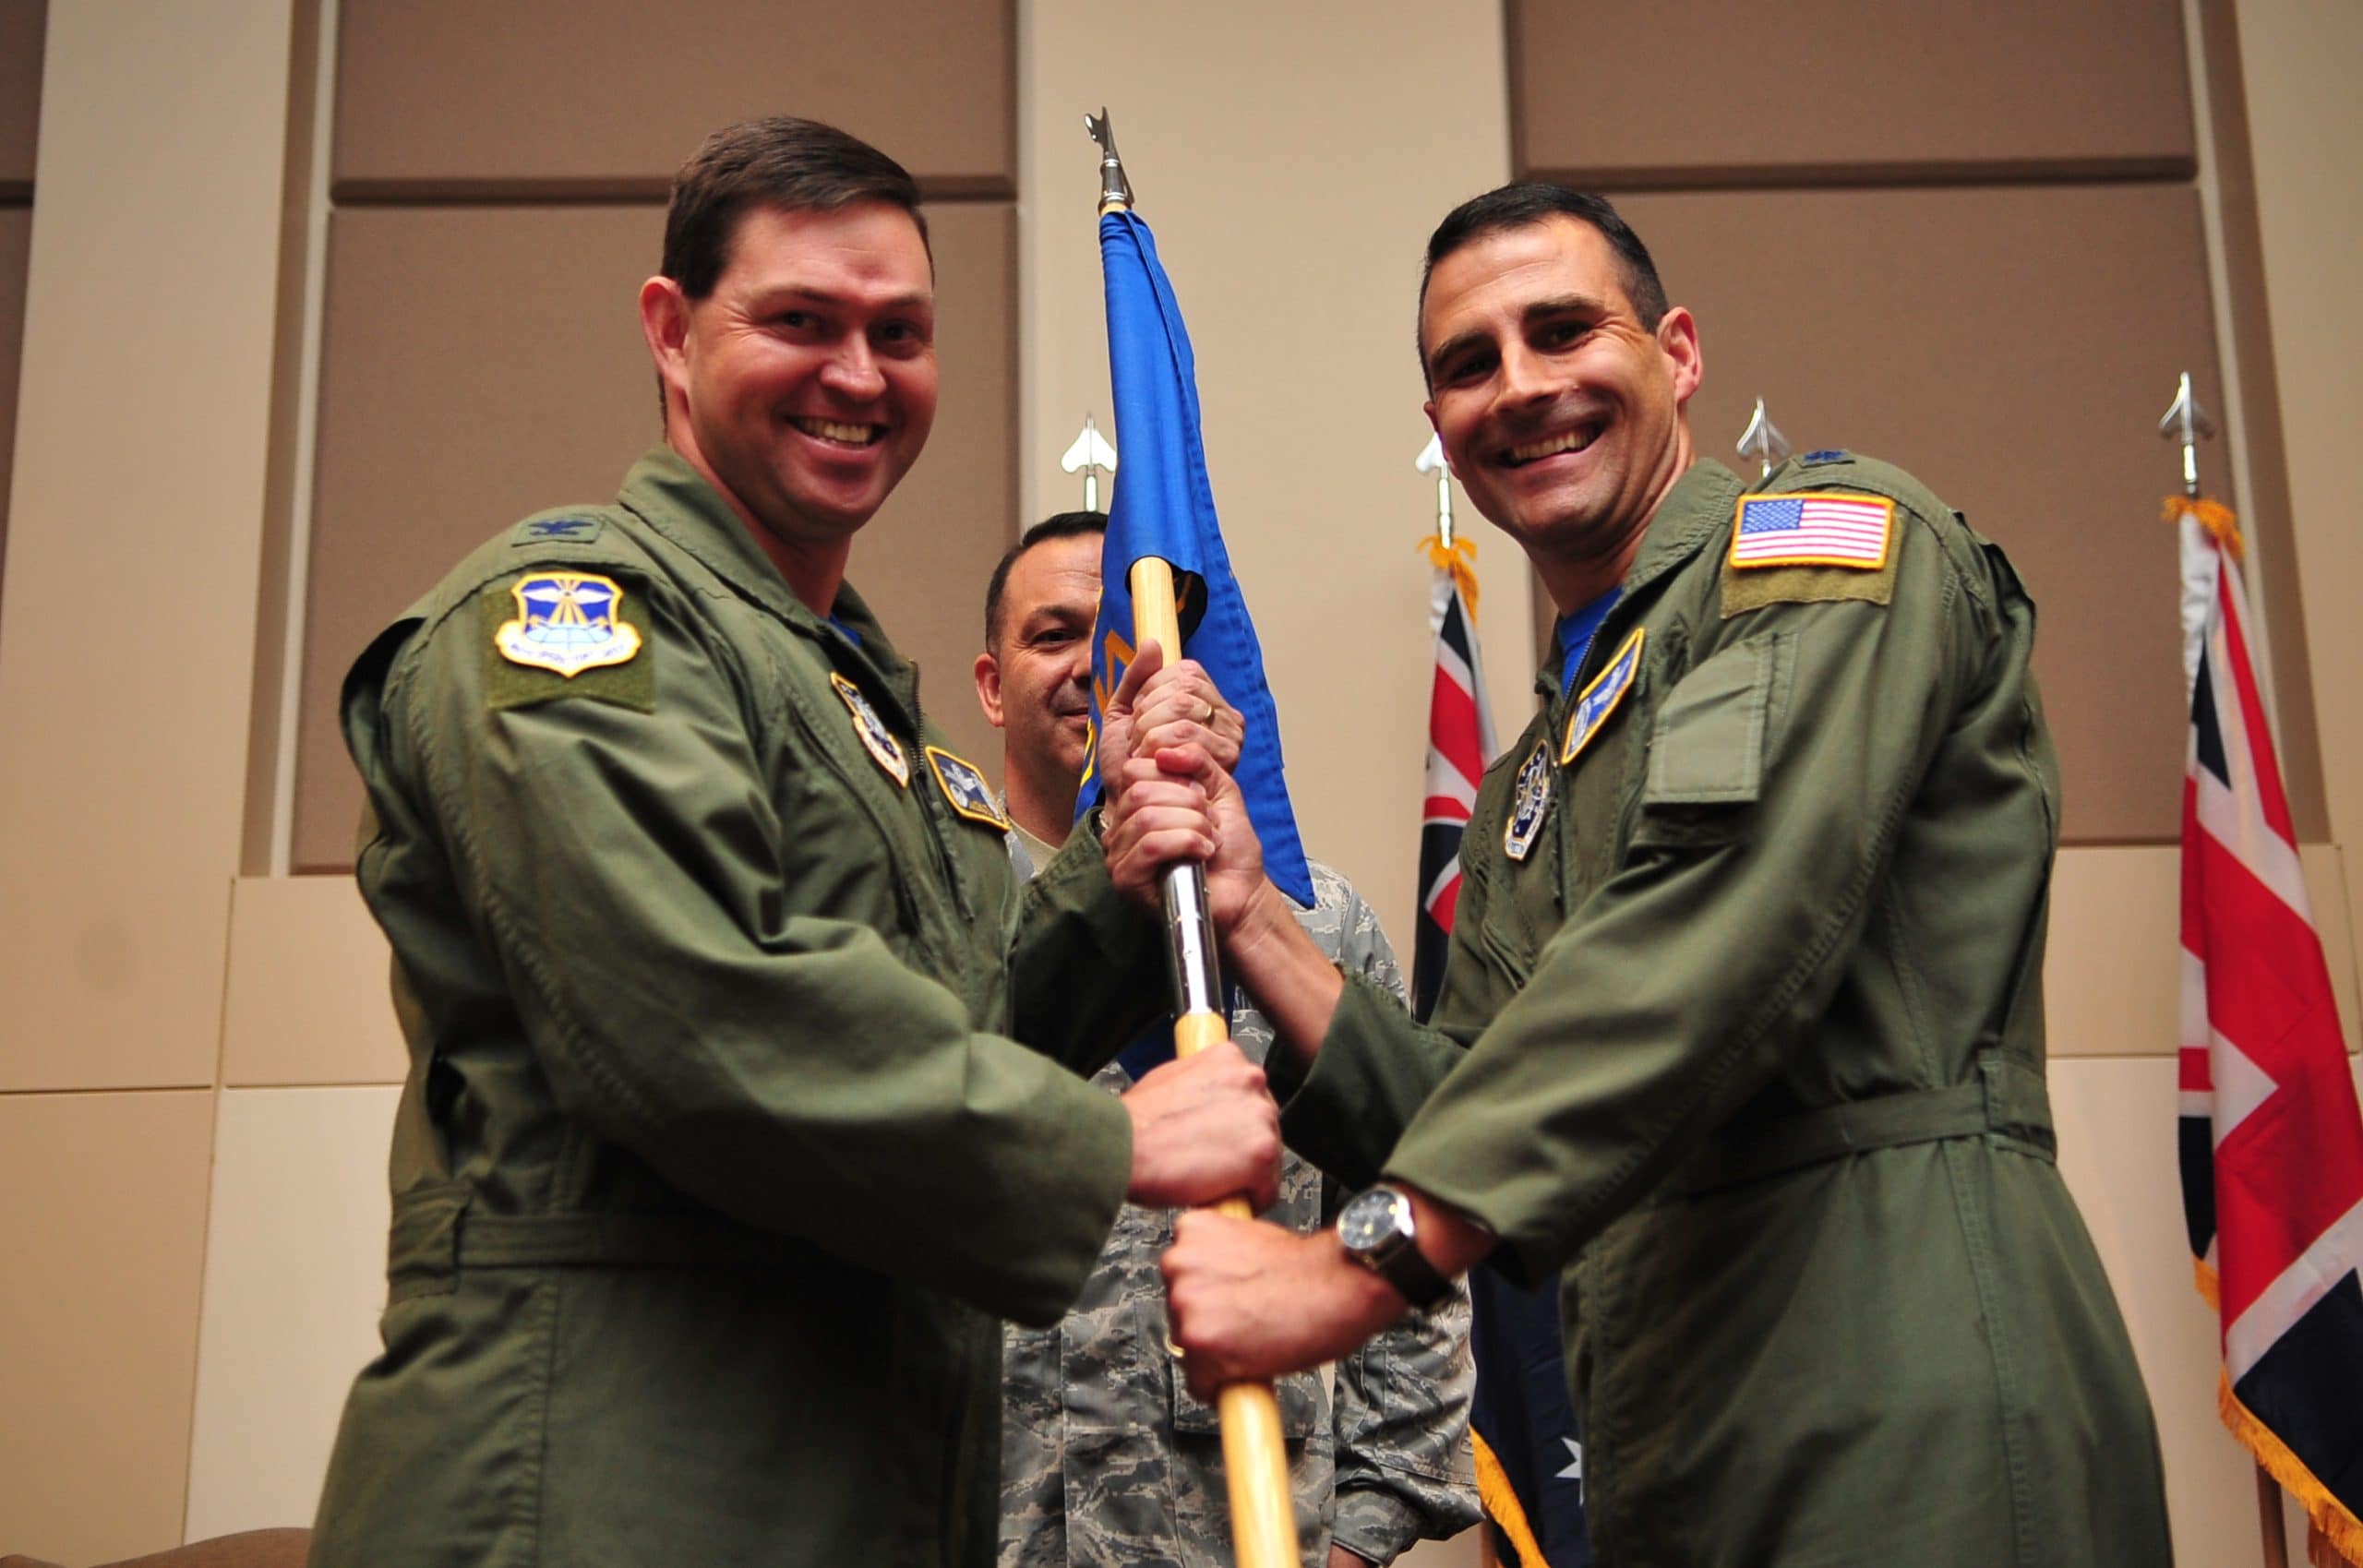 BUCKLEY AIR FORCE BASE, Colo. -- Colonel Bradley Saltzman, 460th Operations Group Commander, presents the flag standard of the 2nd Space Warning Squadron to the incoming commander, Lt. Col. John Henley, June 24, 2011. (U.S. Air Force photo by Staff Sgt. Kathrine McDowell)